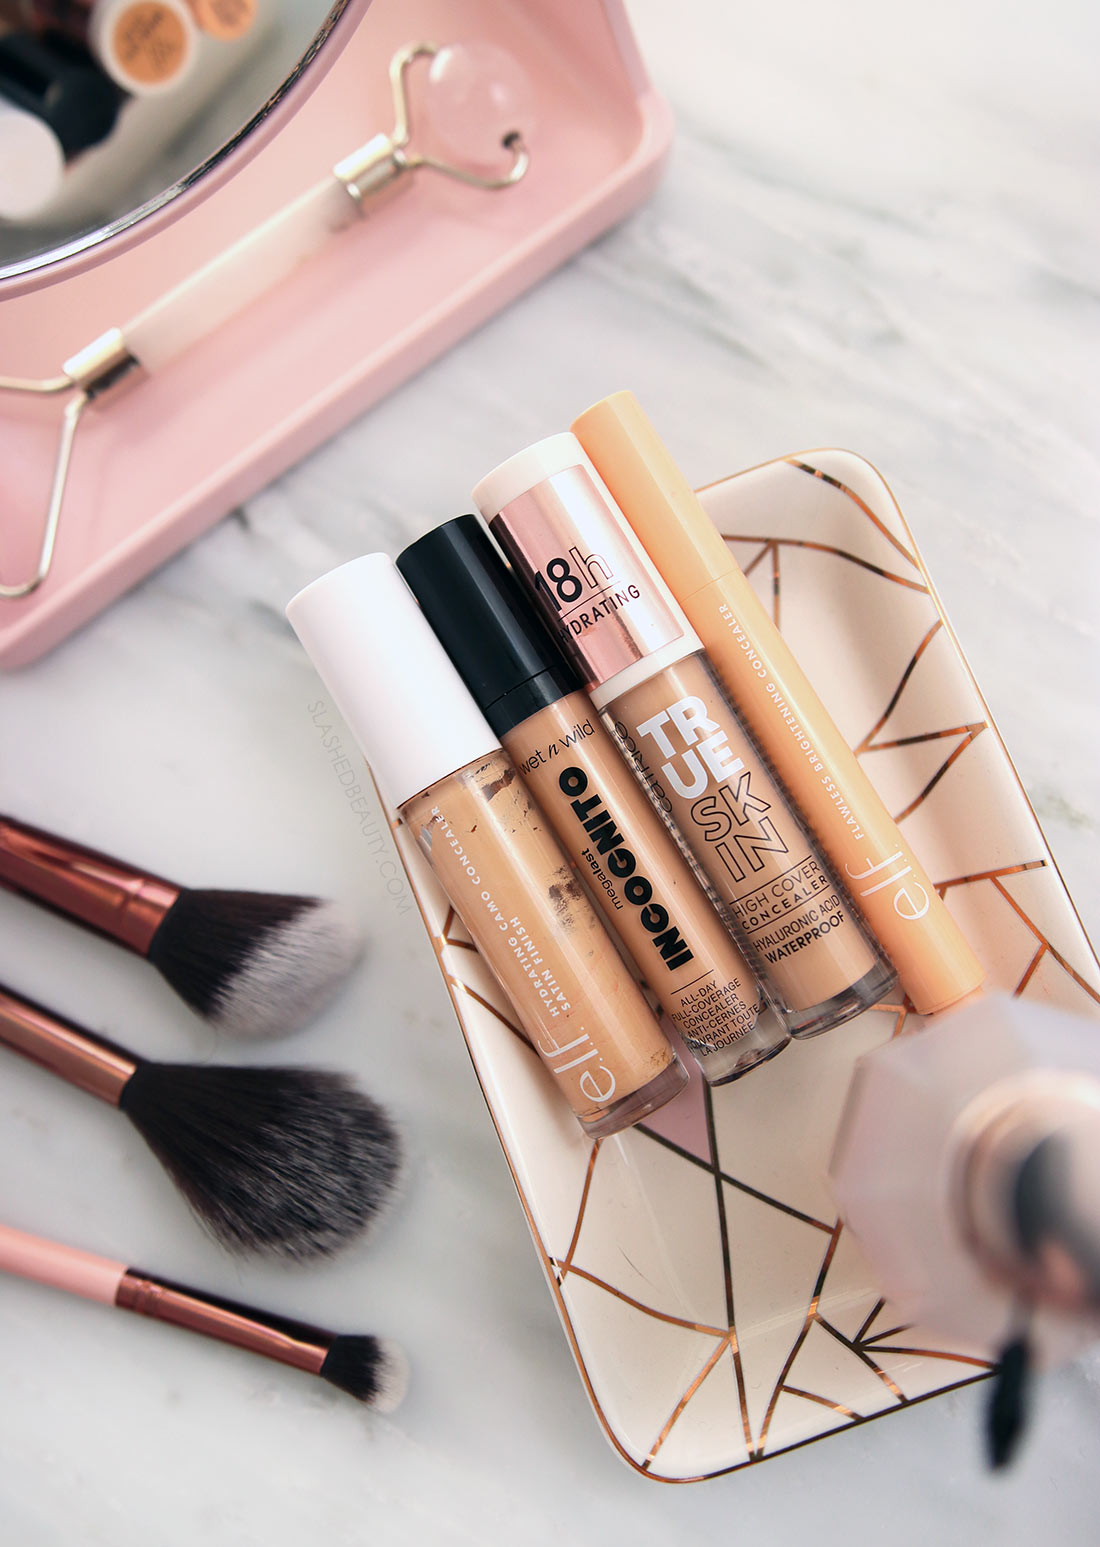 Four drugstore concealers lying on a tray on a marble surface. | The Best Drugstore Concealers Under $10 in 2022 | Slashed Beauty